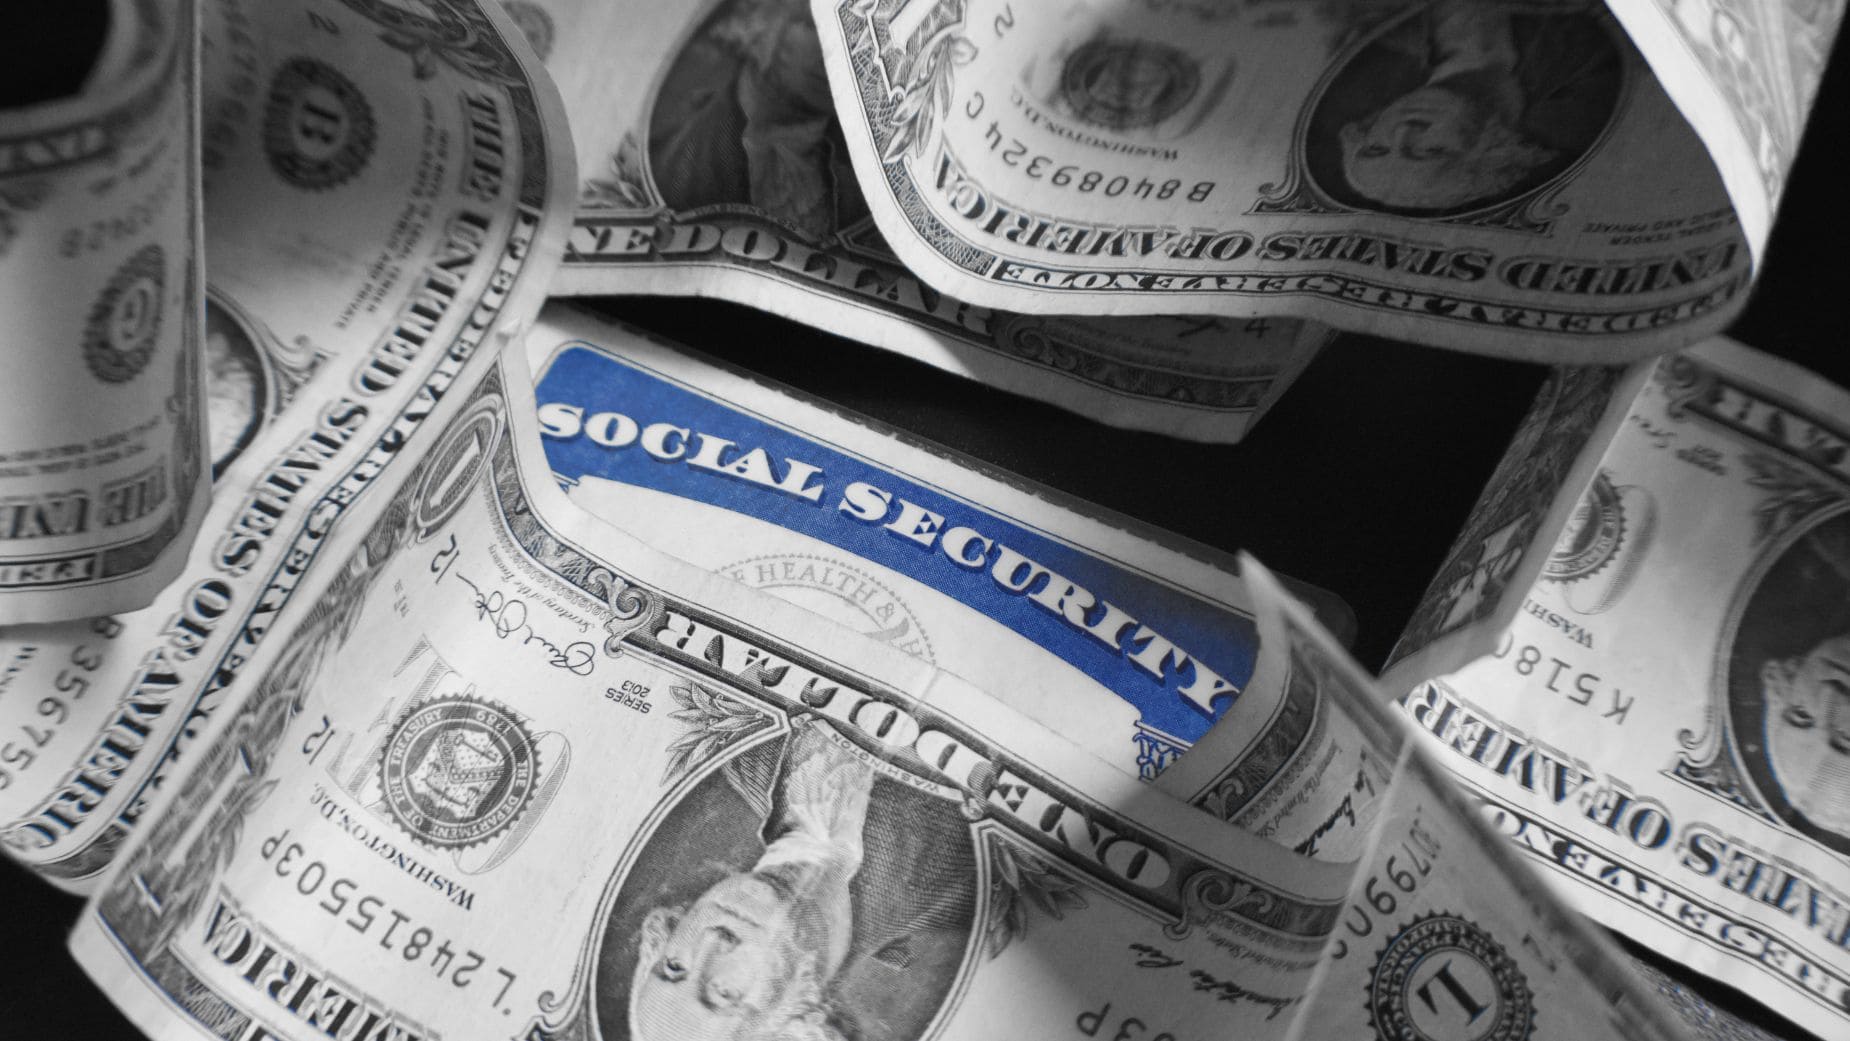 The Supplemental Security Income check arrives every month